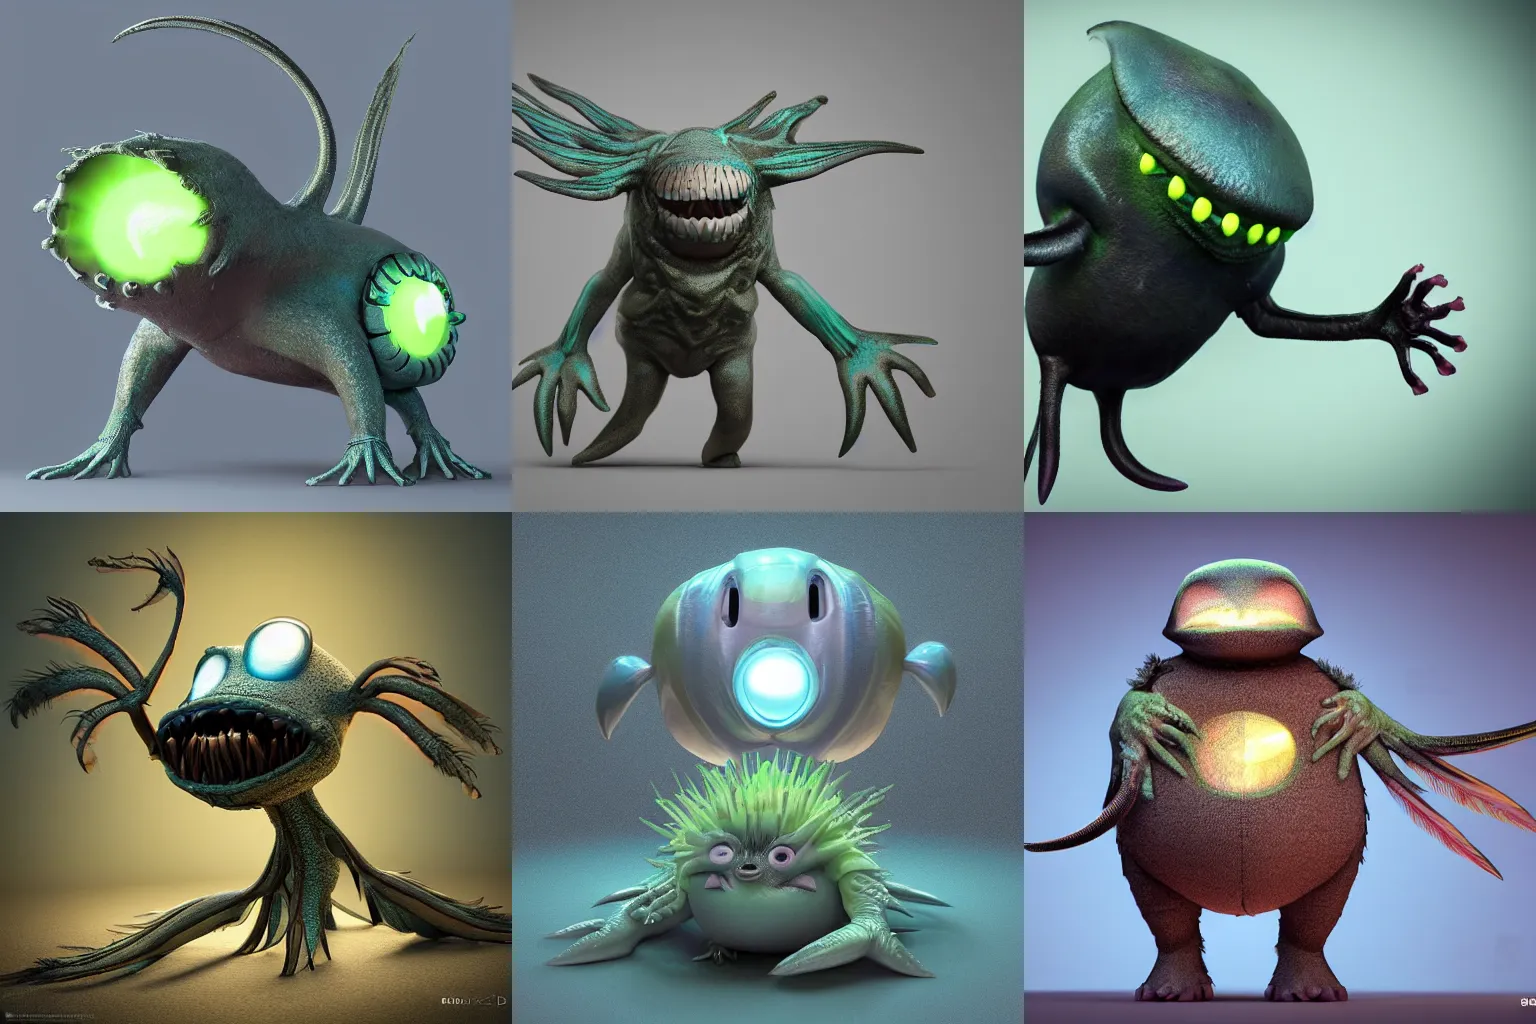 Prompt: cute! c4d, unreal engine, pixar, by hr giger, rimlight, jelly fish dancing, fighting, bioluminescent screaming feathers pictoplasma characterdesign toydesign toy monster bird of paradise creature, zbrush, octane, hardsurface modelling, artstation, cg society, by greg rutkowksi, by Eddie Mendoza, by Peter mohrbacher, by tooth wu